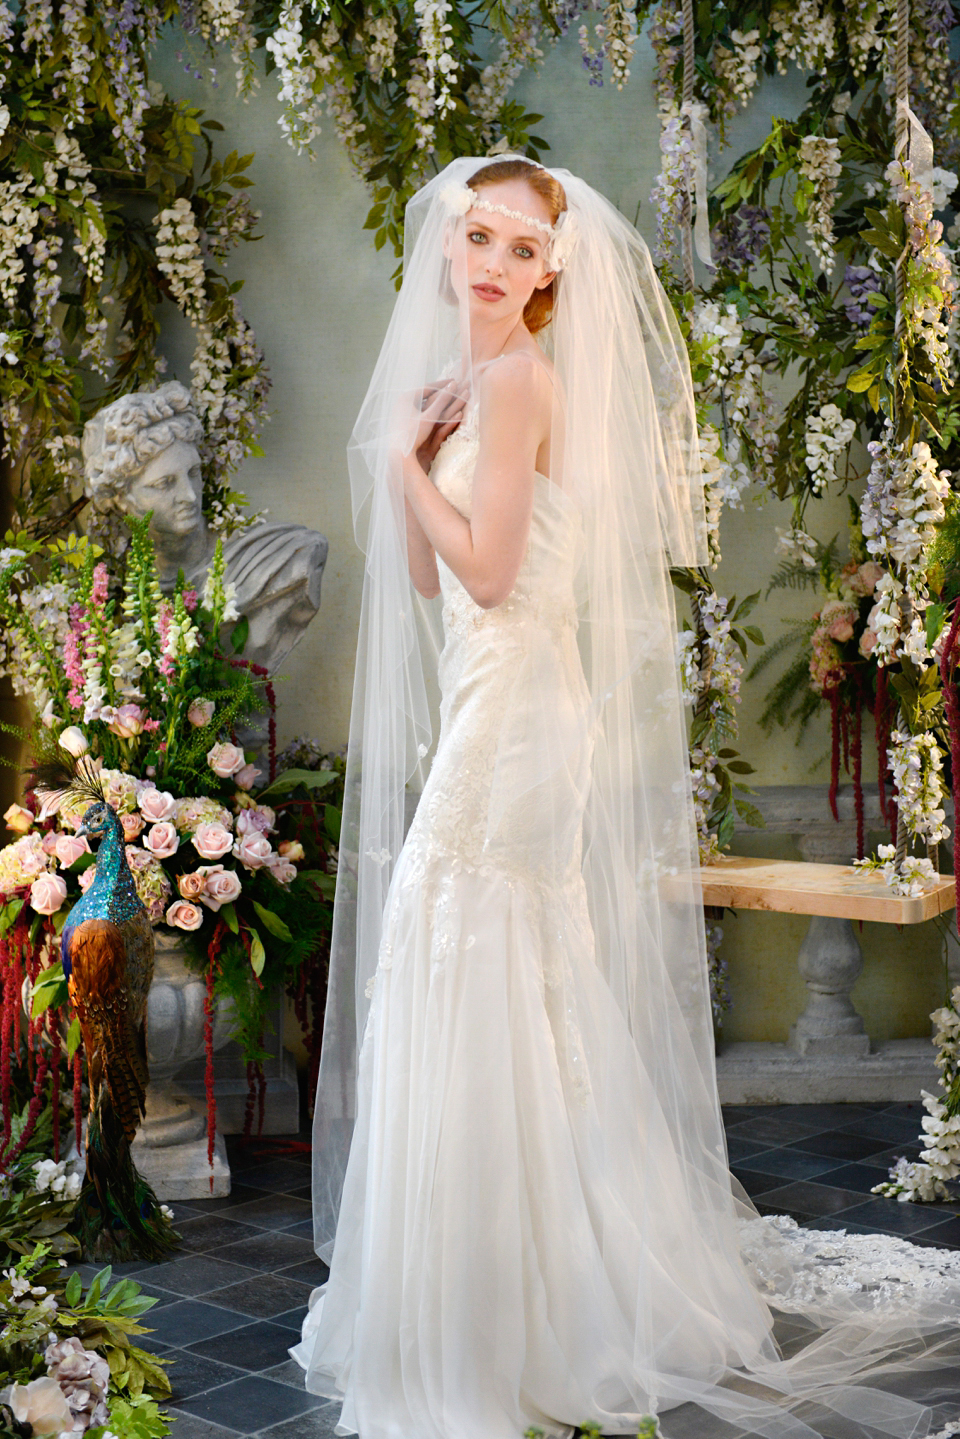 Siren Wedding Dress from Terry Fox's Siren Song Collection of Bridal Gowns